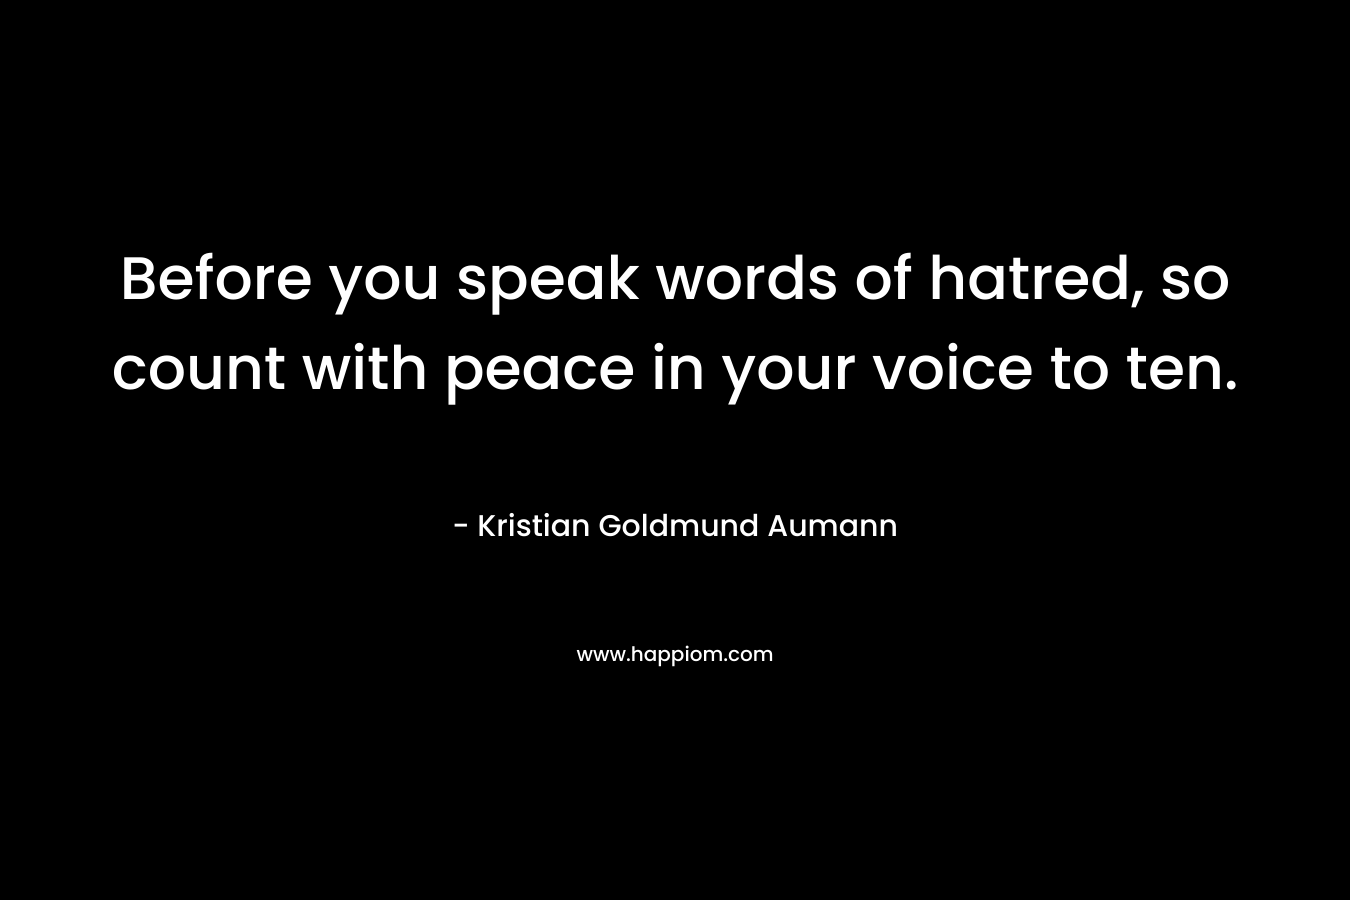 Before you speak words of hatred, so count with peace in your voice to ten. – Kristian Goldmund Aumann